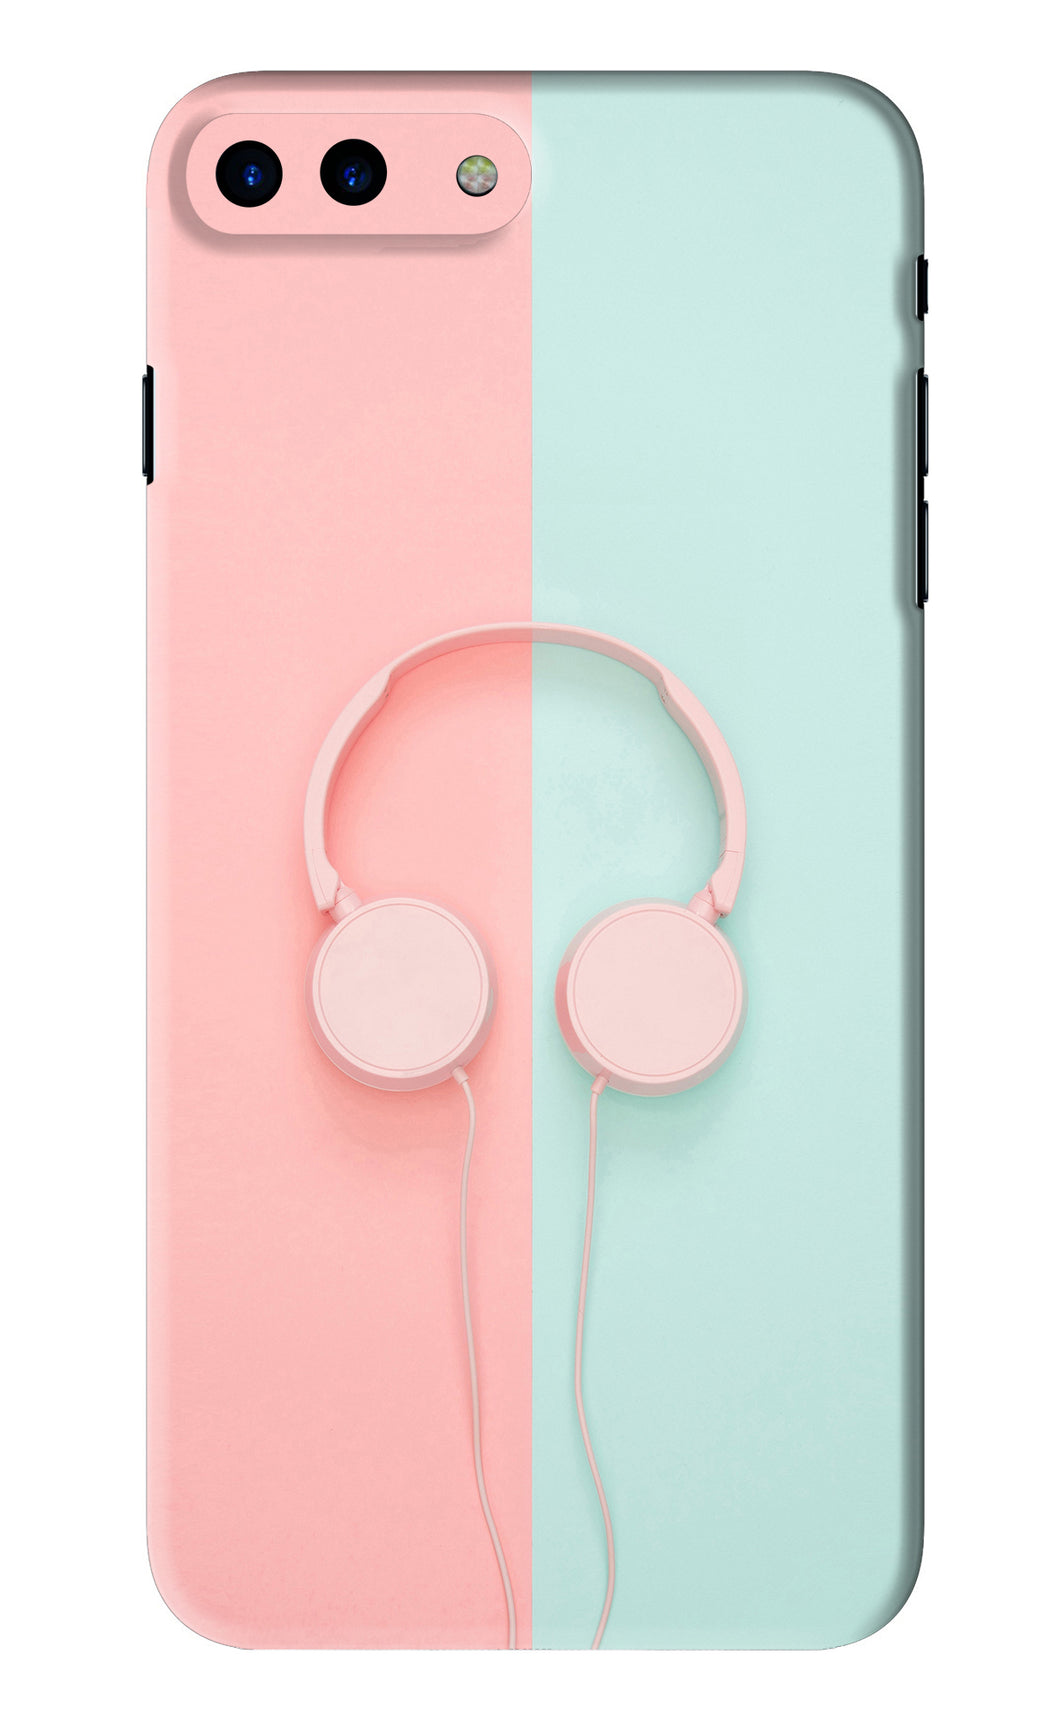 Music Lover iPhone 7 Plus Back Skin Wrap